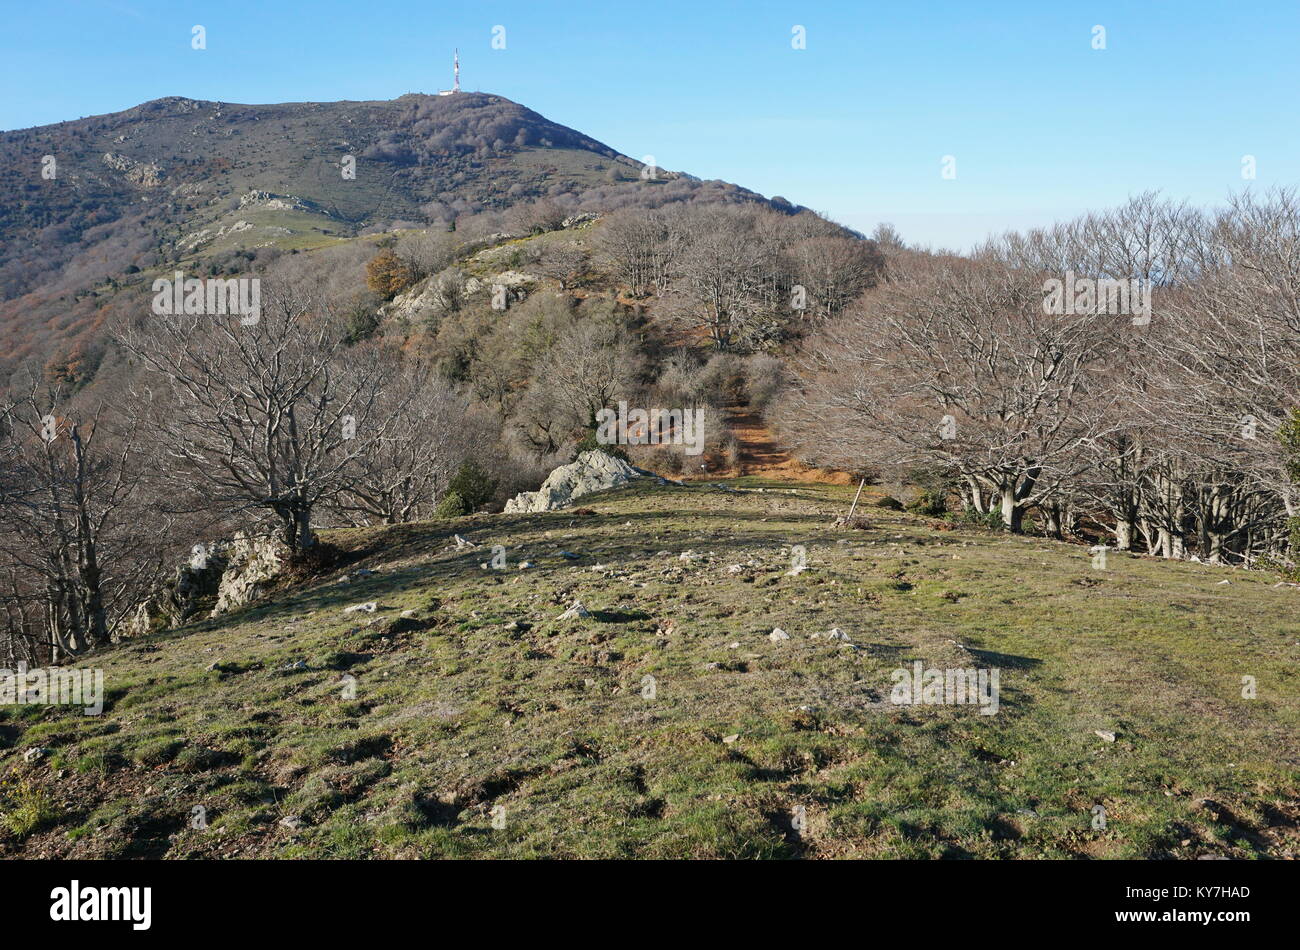 Mountain landscape near the peak Neulos in the Albera Massif between France and Spain, Pyrenees Orientales, Catalonia Stock Photo